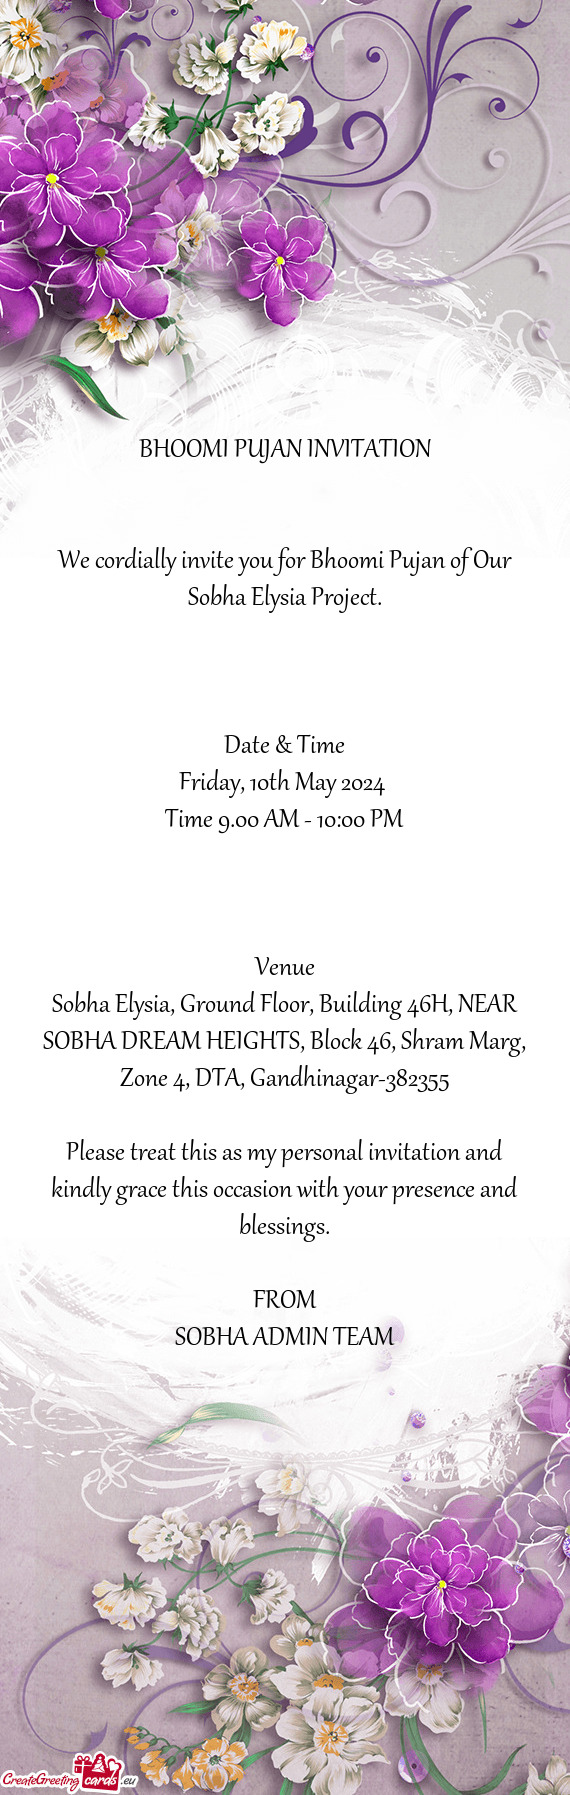 We cordially invite you for Bhoomi Pujan of Our Sobha Elysia Project